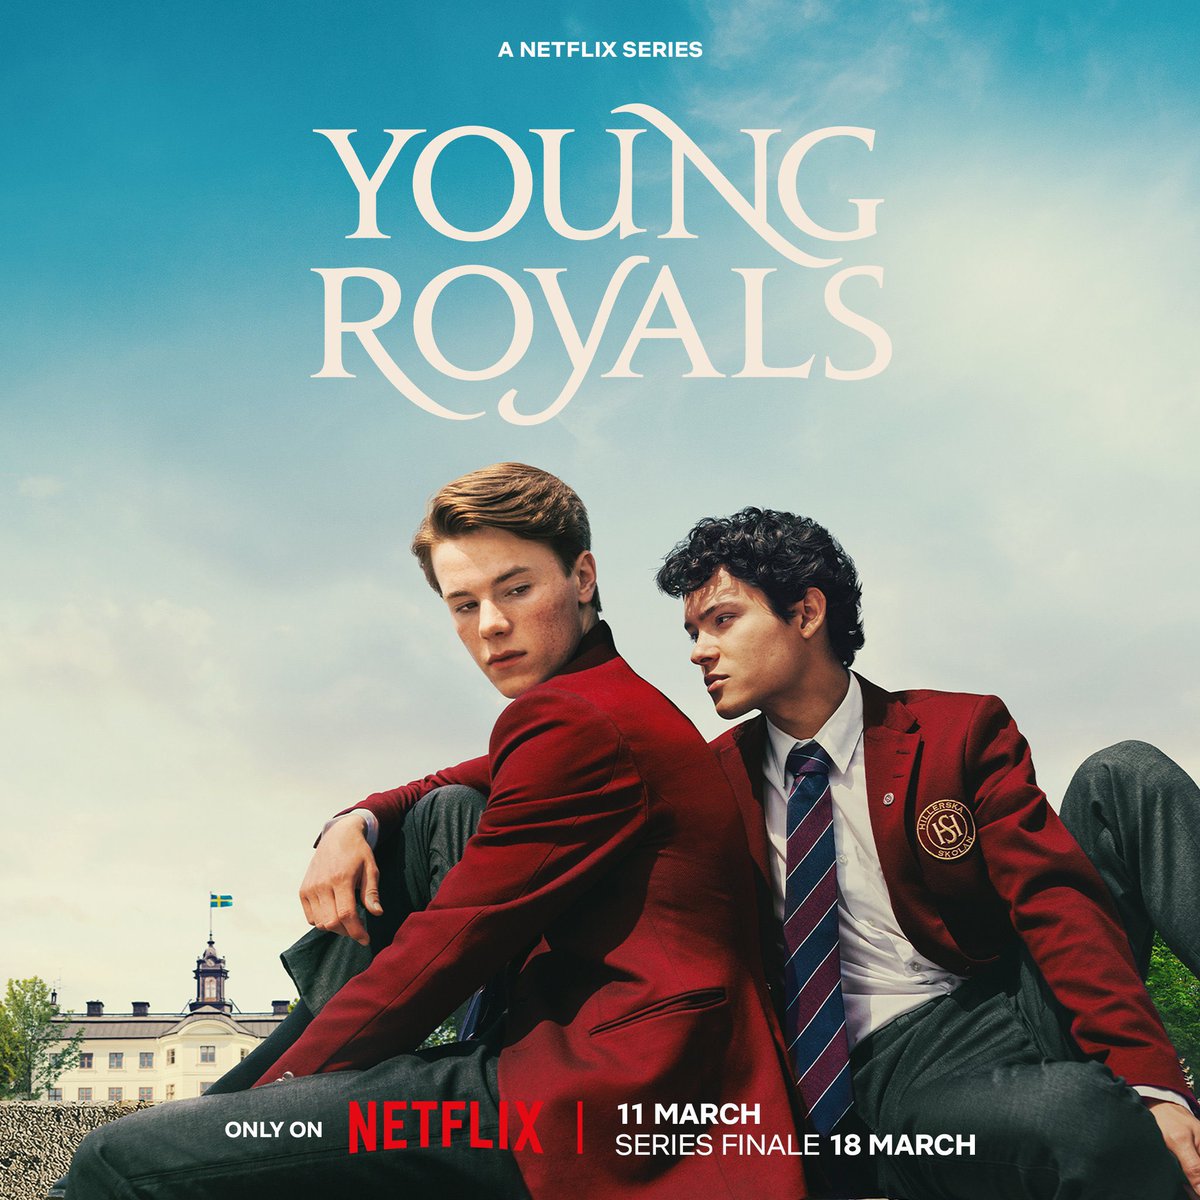 The official poster for the final season of Young Royals is here.